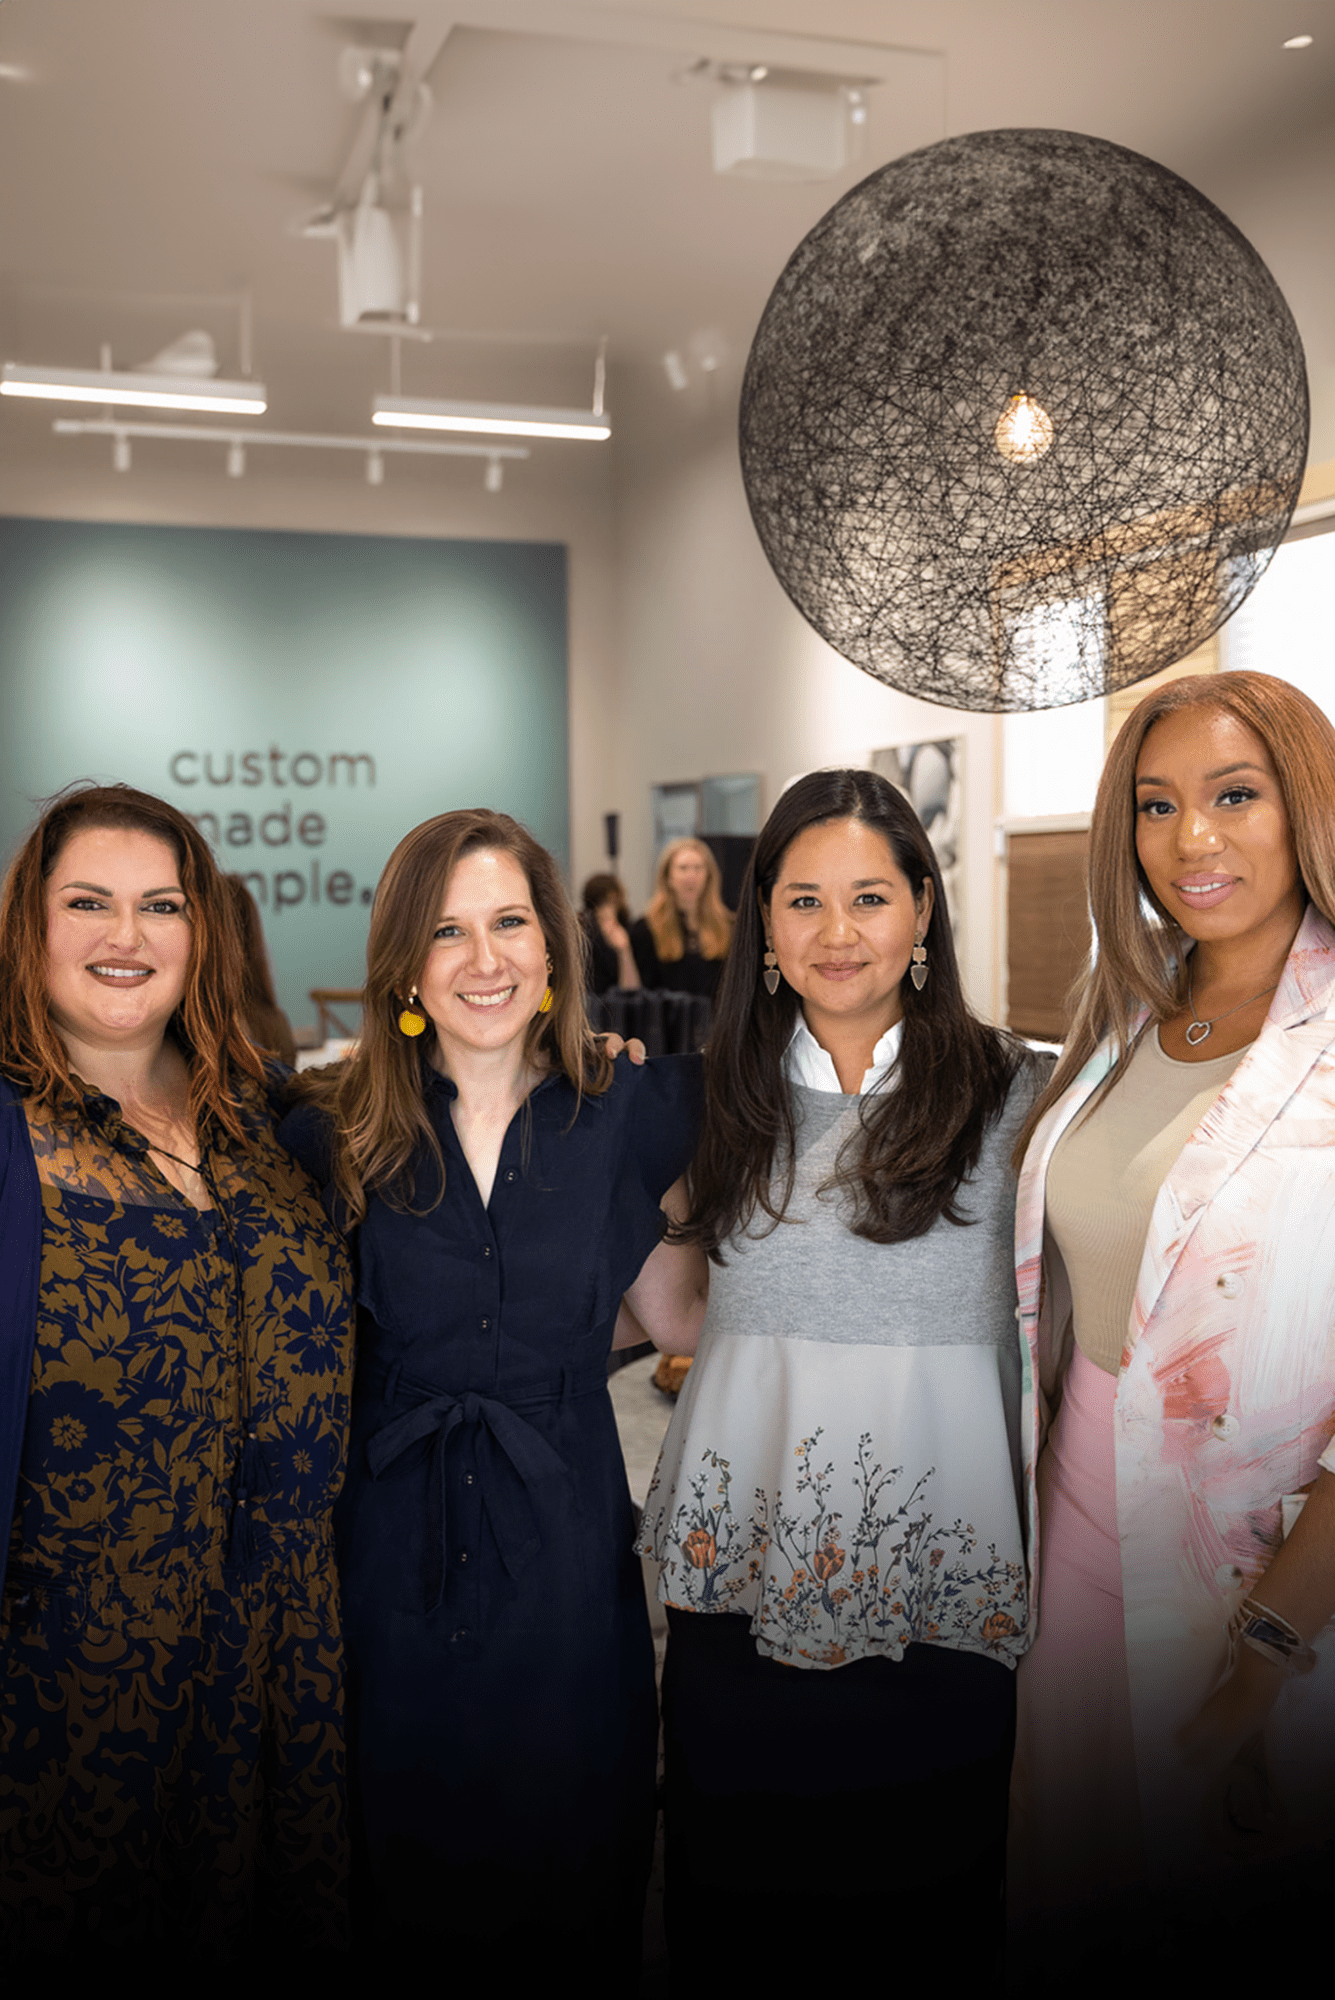 Ann Arbor designer community connects with The Shade Store and Business of Home